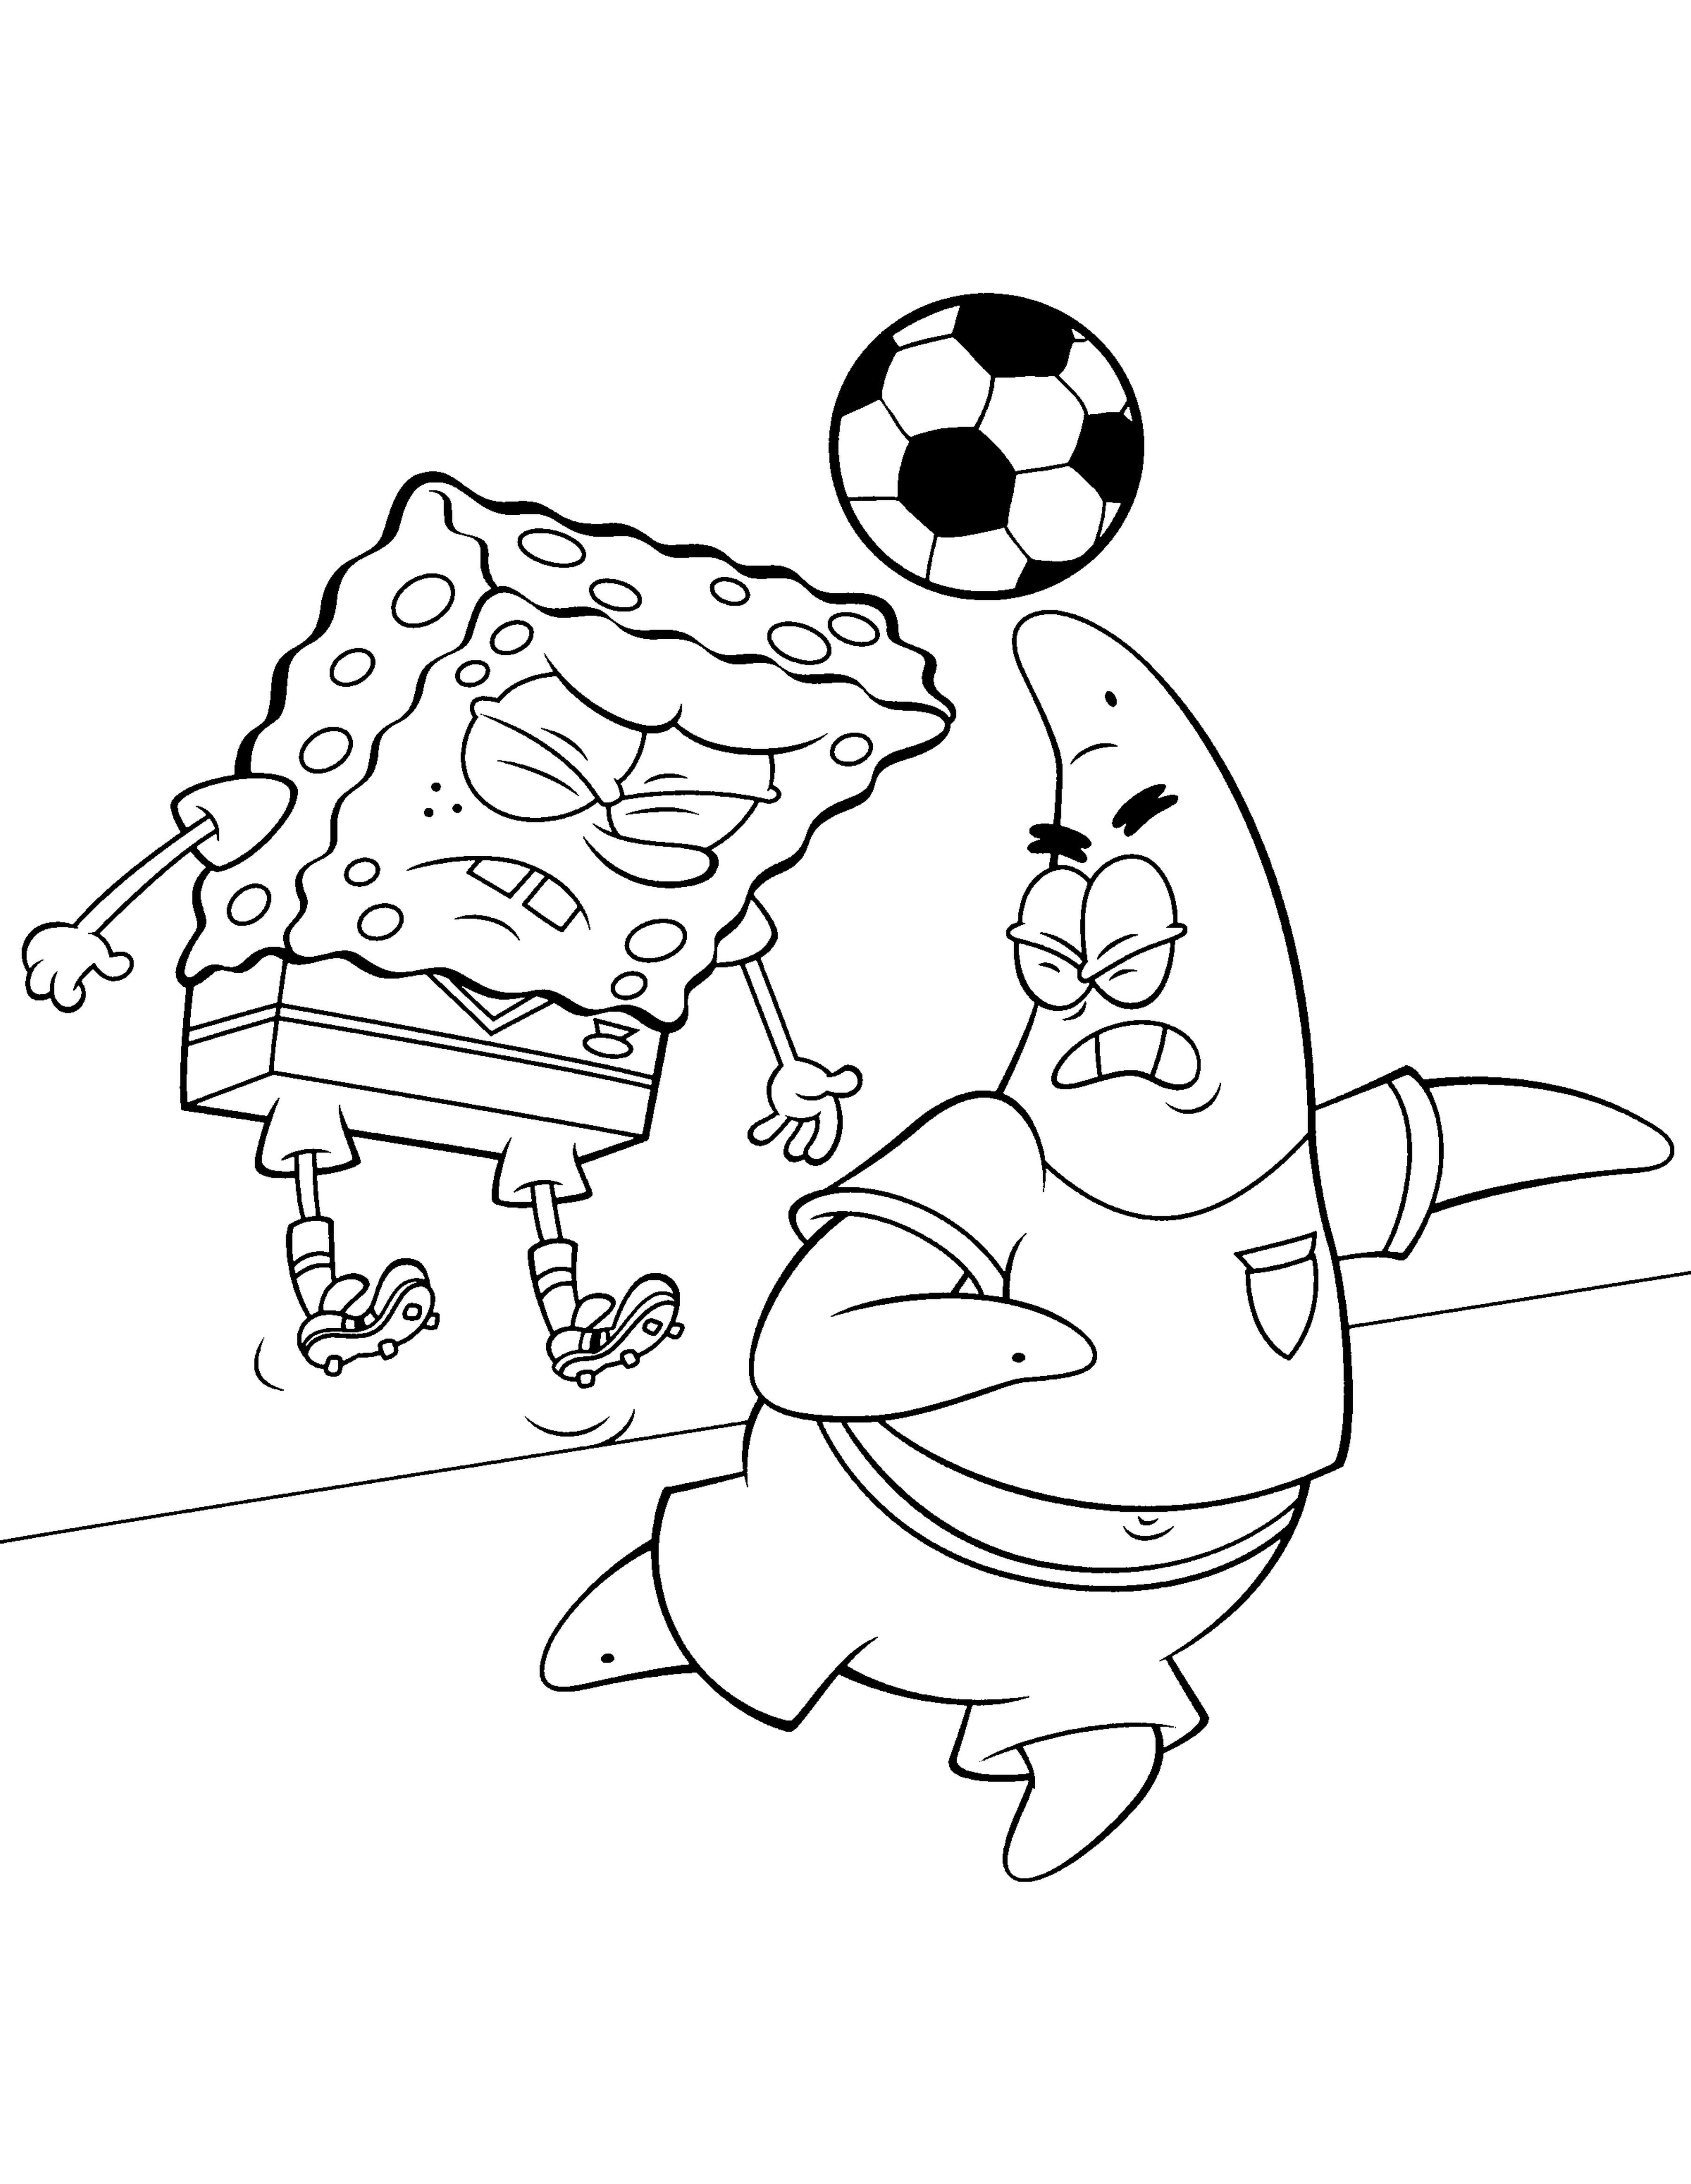 Free Coloring Pages Sports
 27 Best and Free Sports Coloring Pages Gianfreda